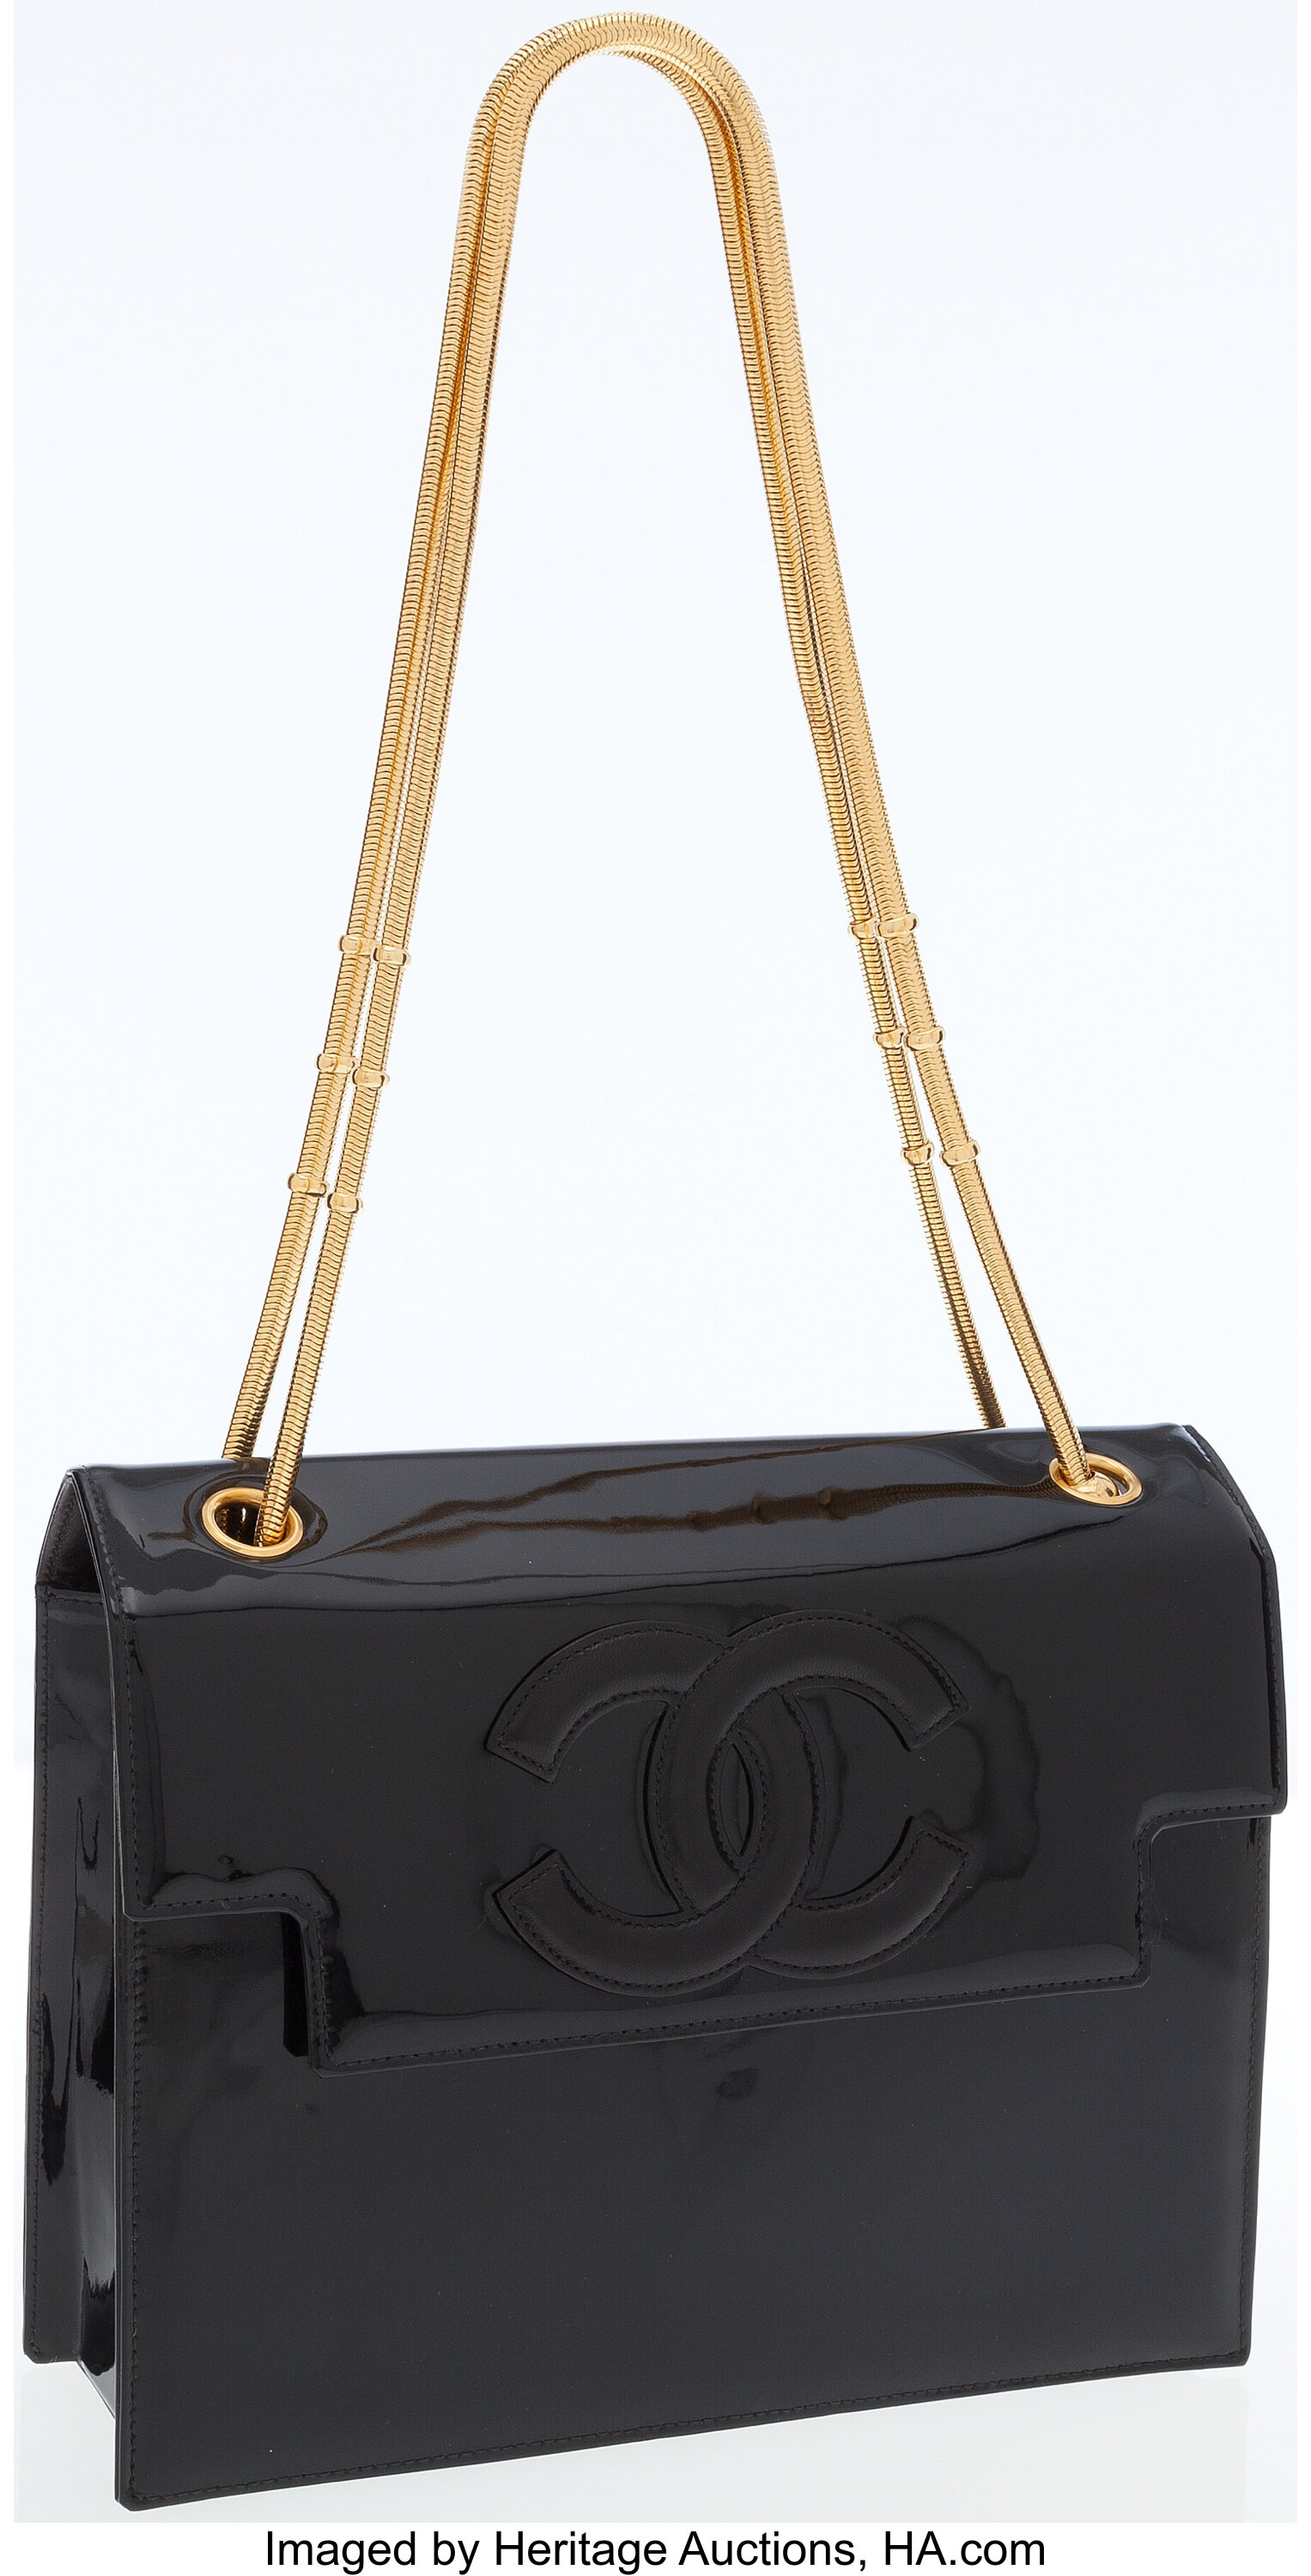 Chanel Black Patent Leather Shoulder Bag with Gold Chain Rope